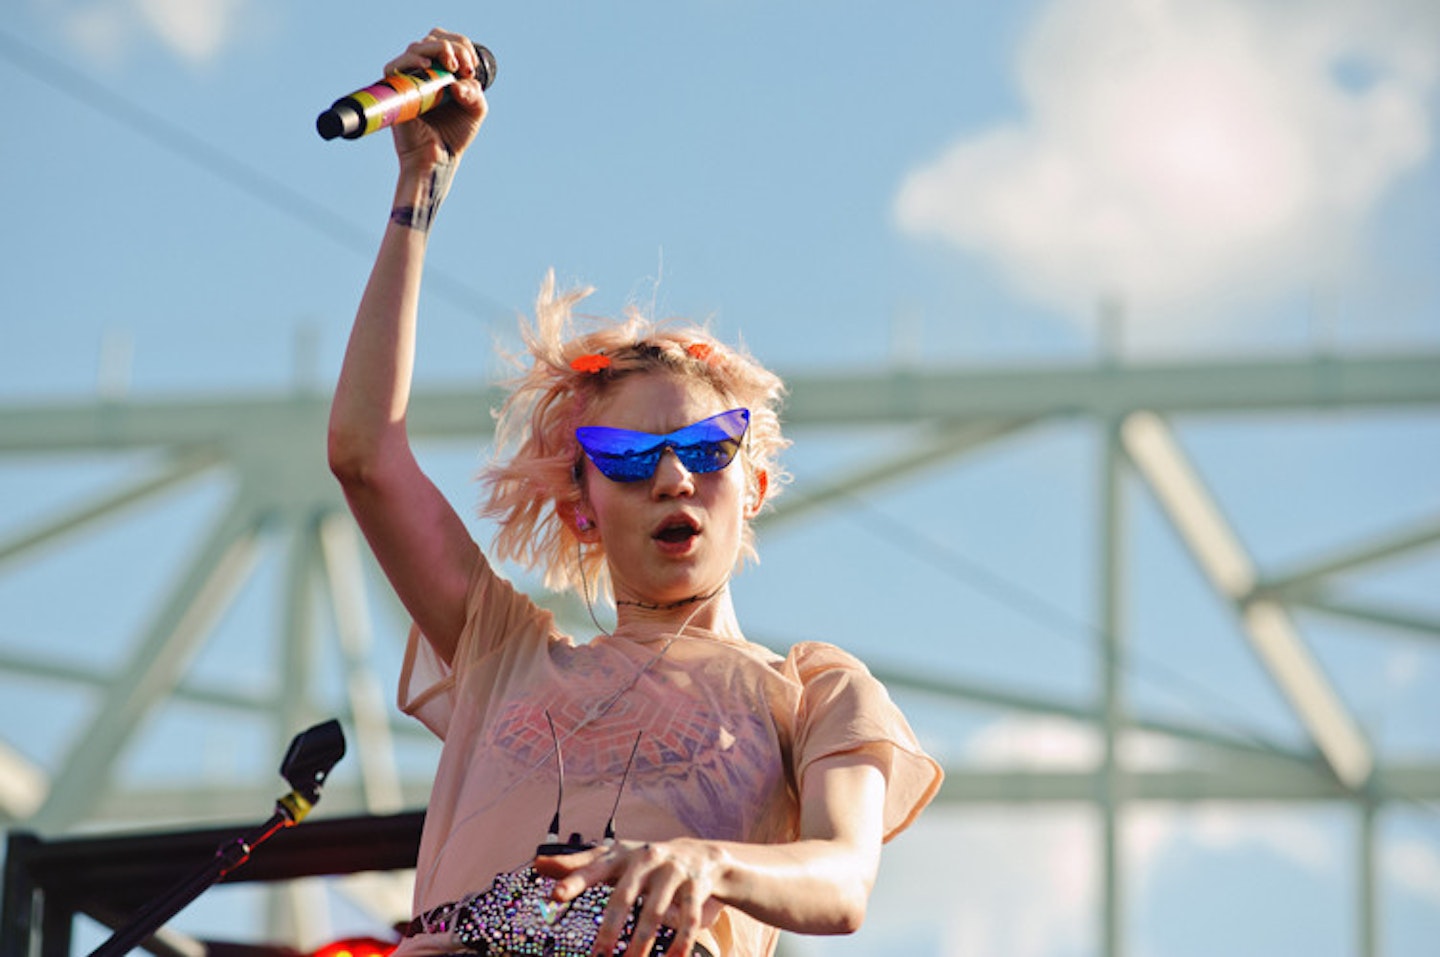 Grimes Partners With Stella McCartney for Adidas Collection